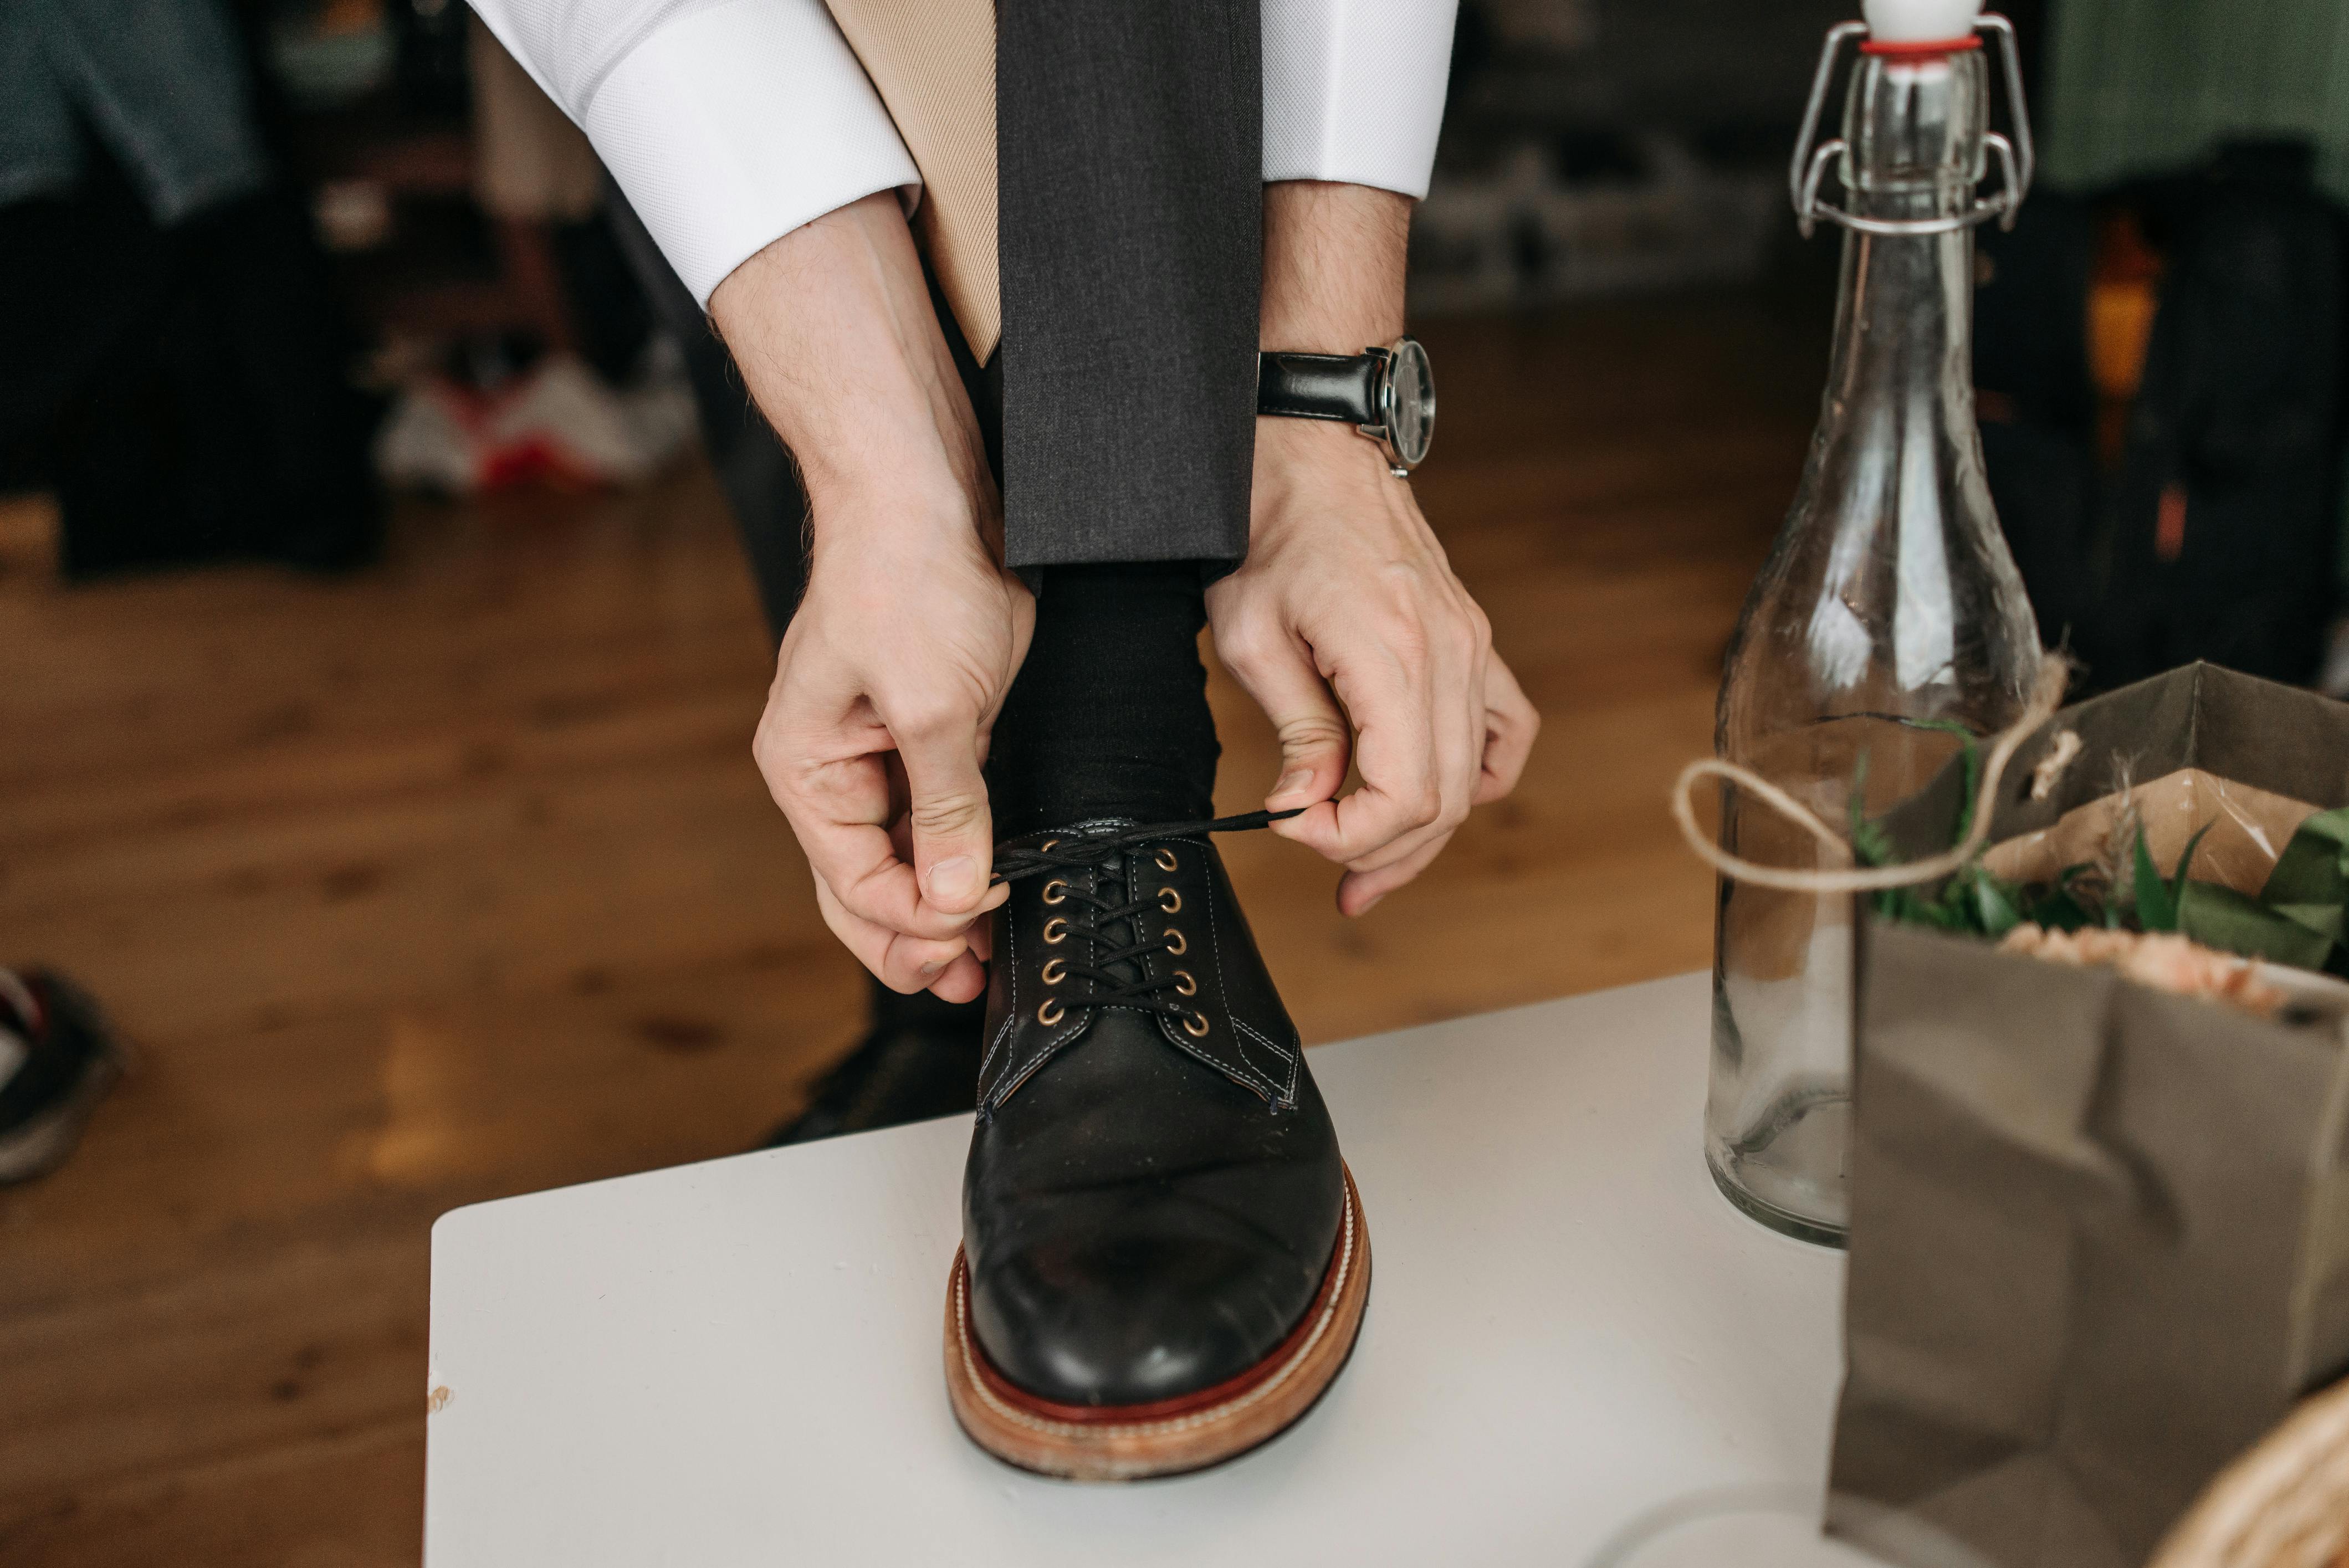 Person Sitting and Wearing Dress Pants and Shoes · Free Stock Photo